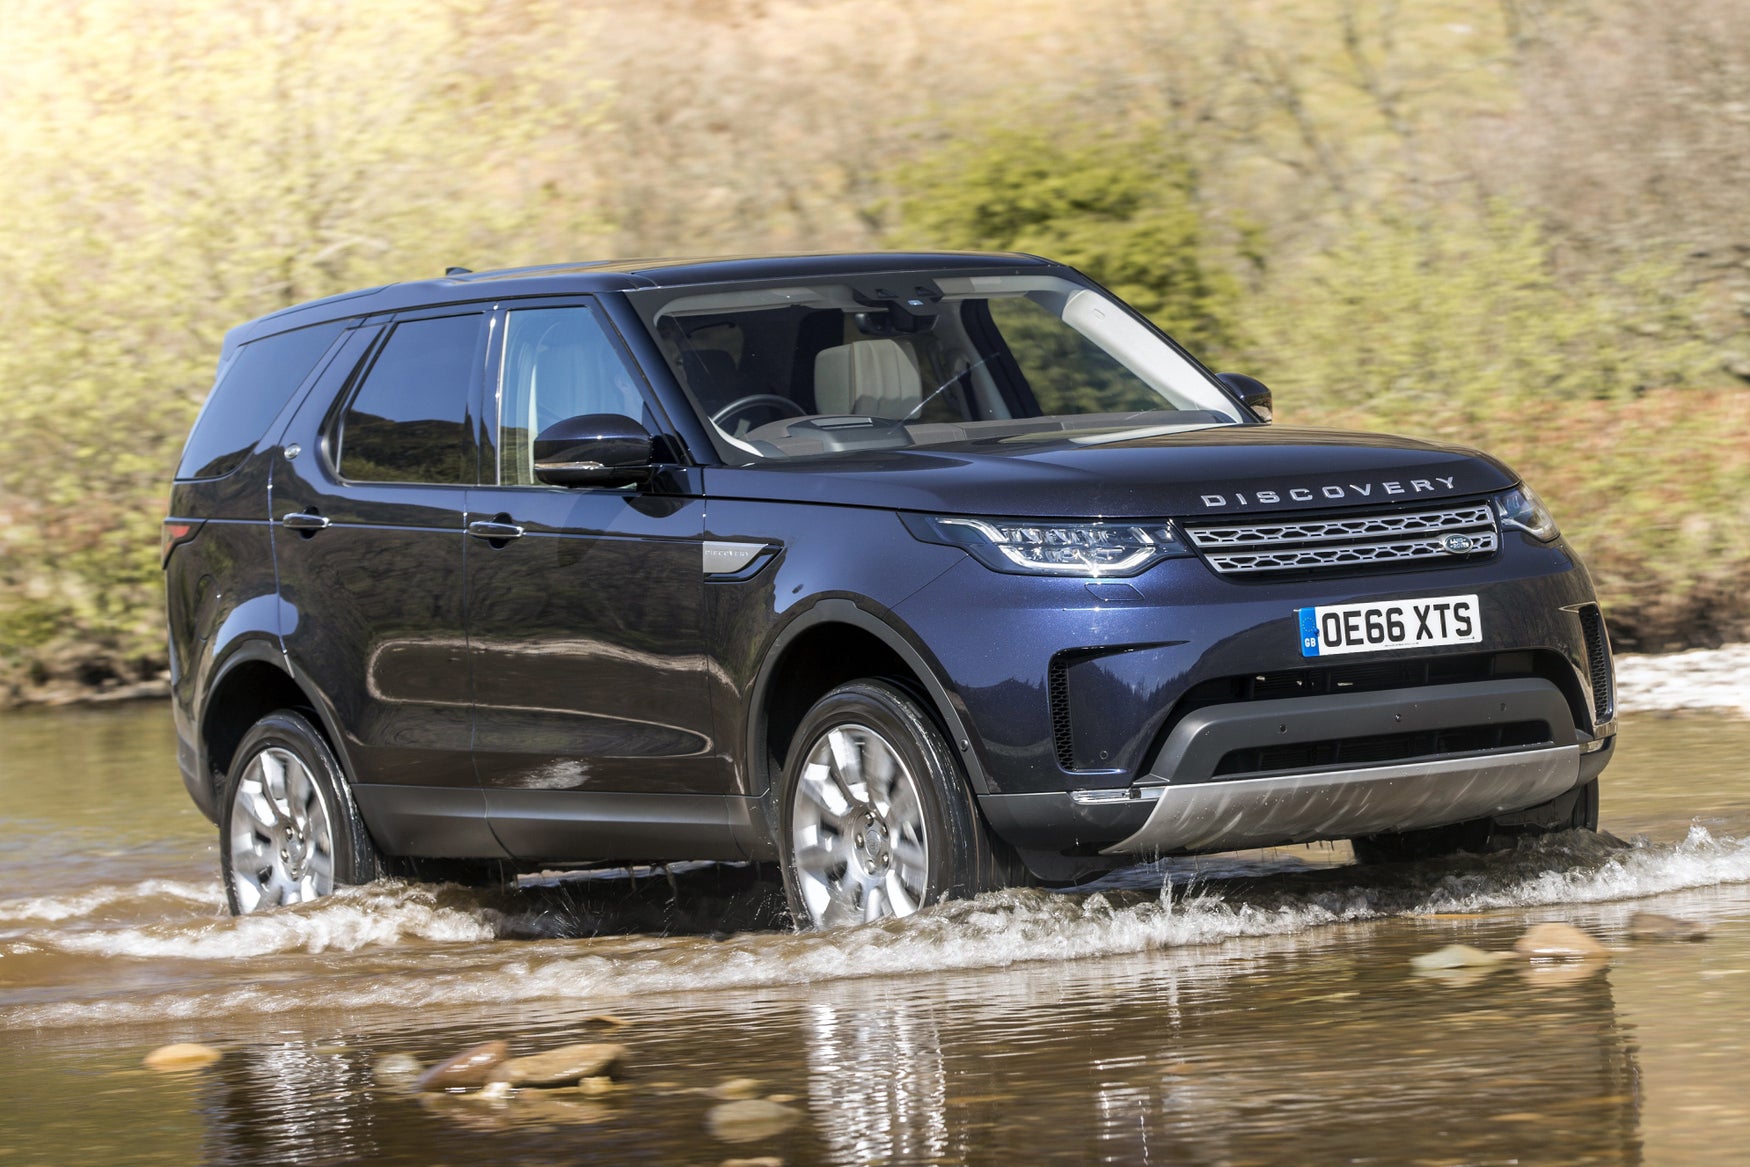 Land Rover Discovery 2023 Review: exterior front three quarter photo of the Land Rover Discovery off-road